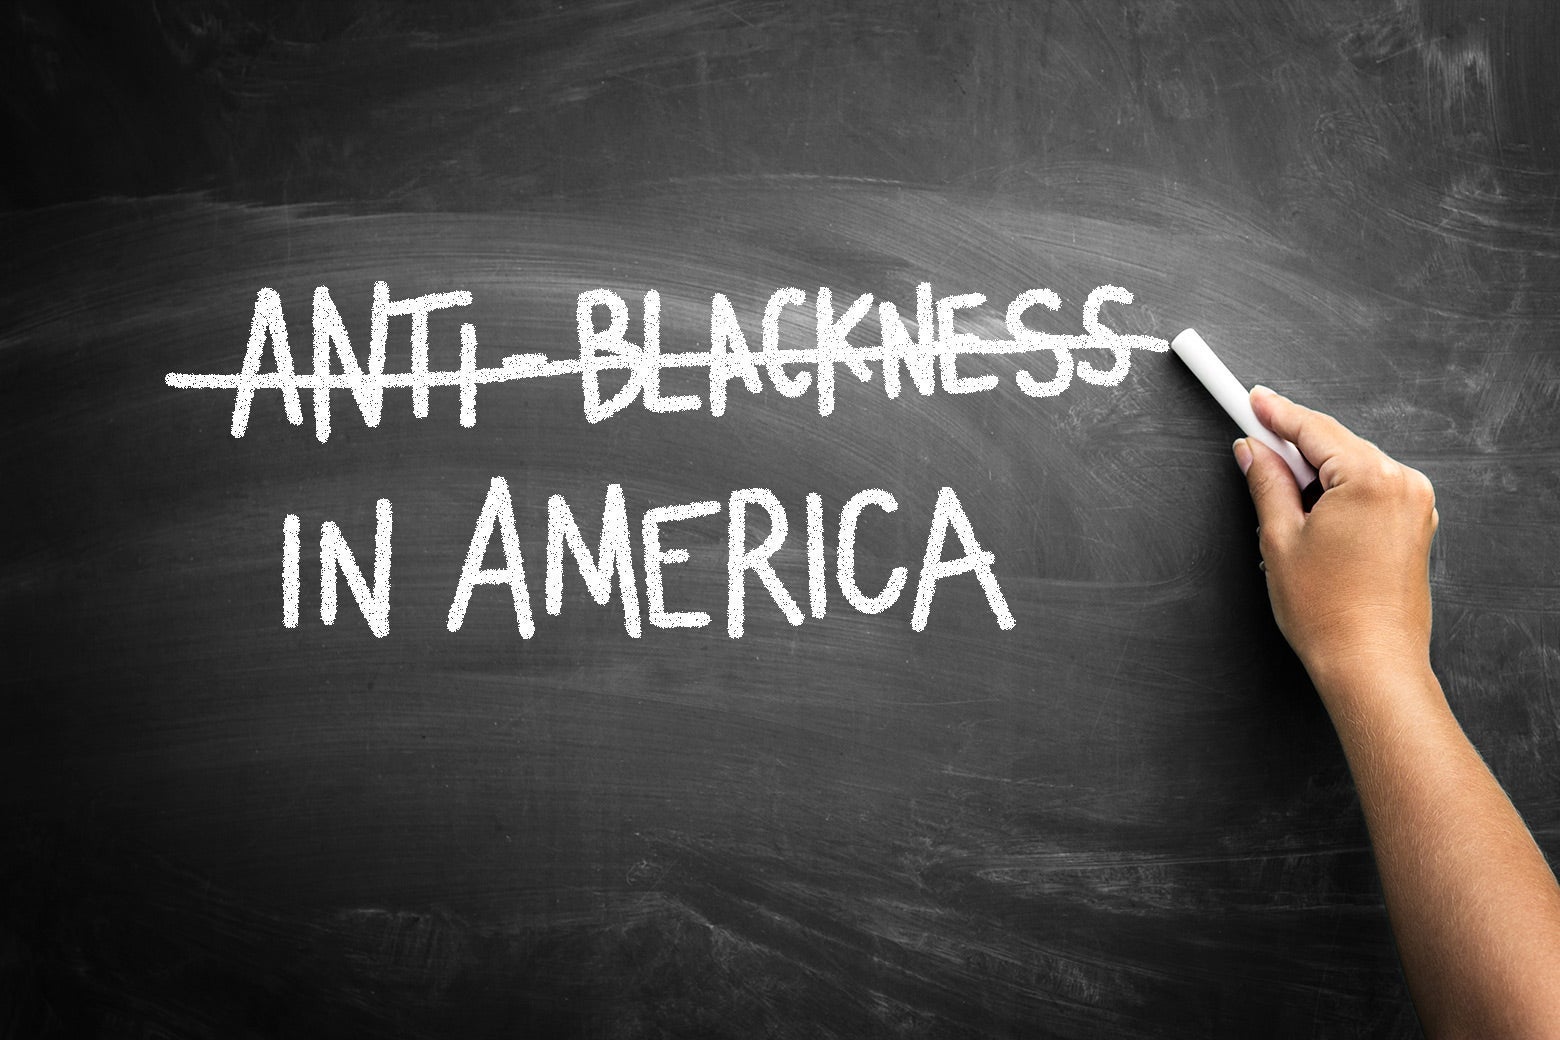 A blackboard with the text ANTI-BLACKNESS IN AMERICA written in white chalk, but "ANTI-BLACKNESS" is crossed out.